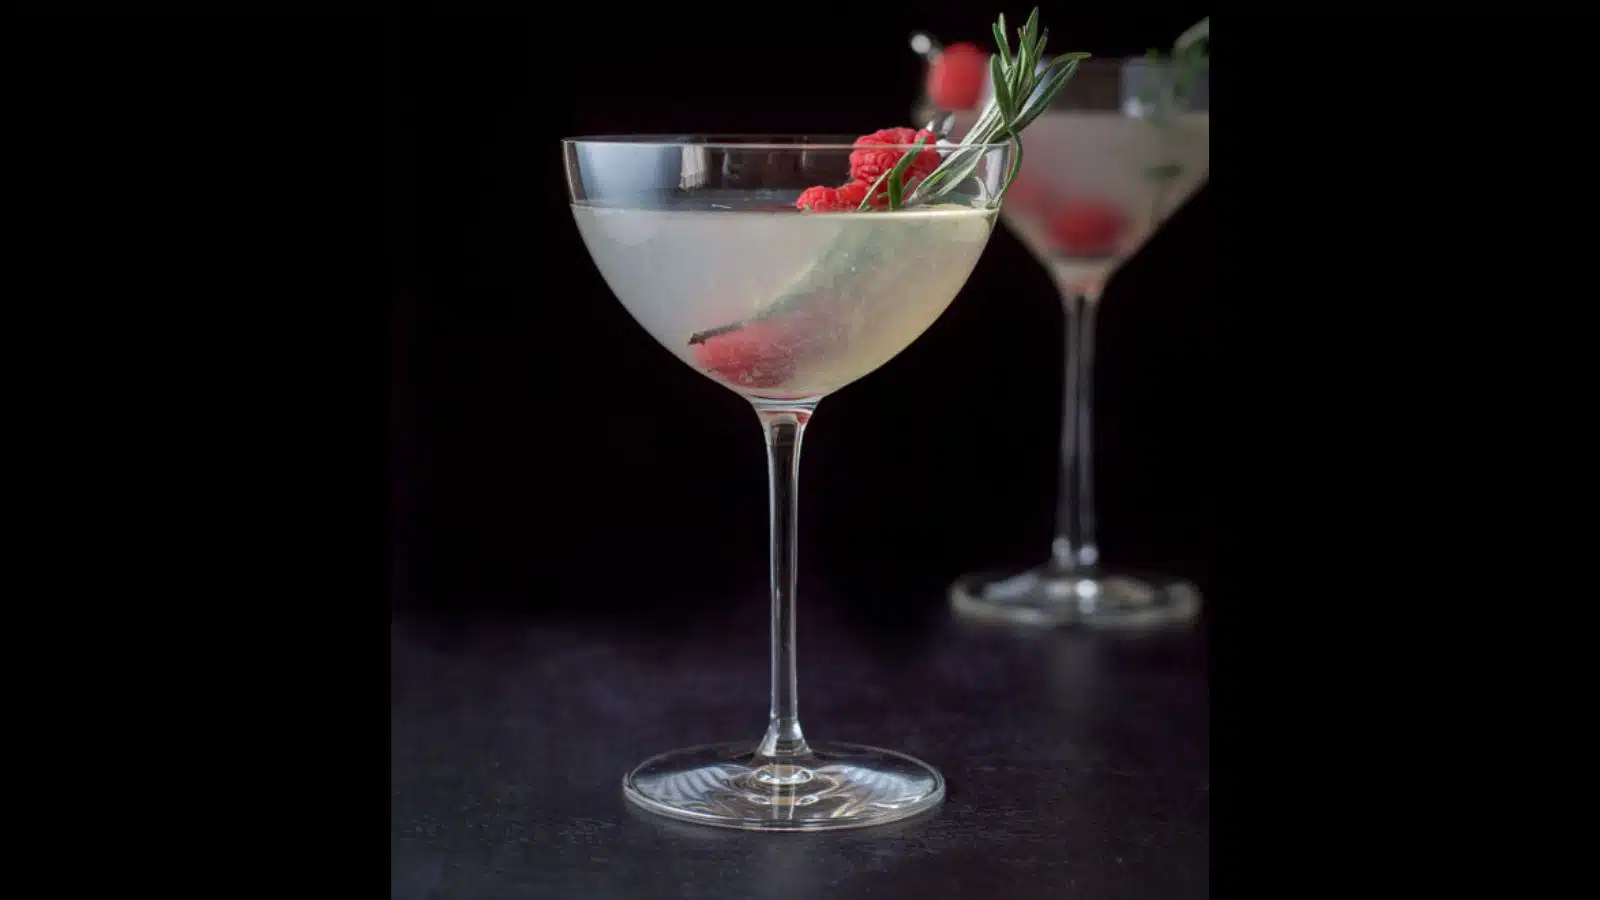 Two martini glasses filled with the festive cocktail with rosemary sprigs and raspberries